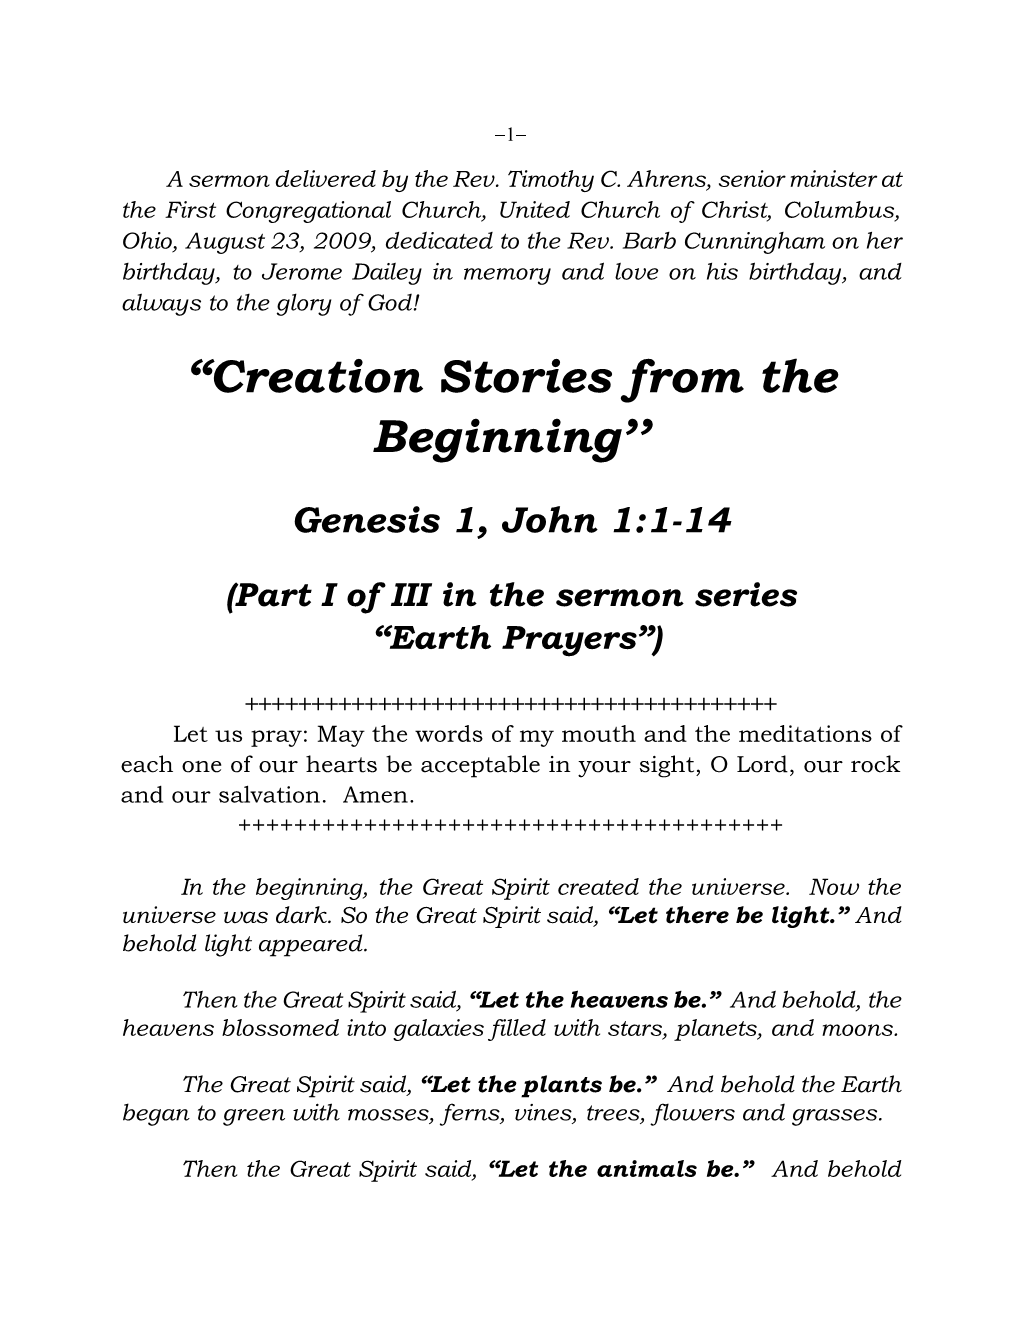 “Creation Stories from the Beginning''